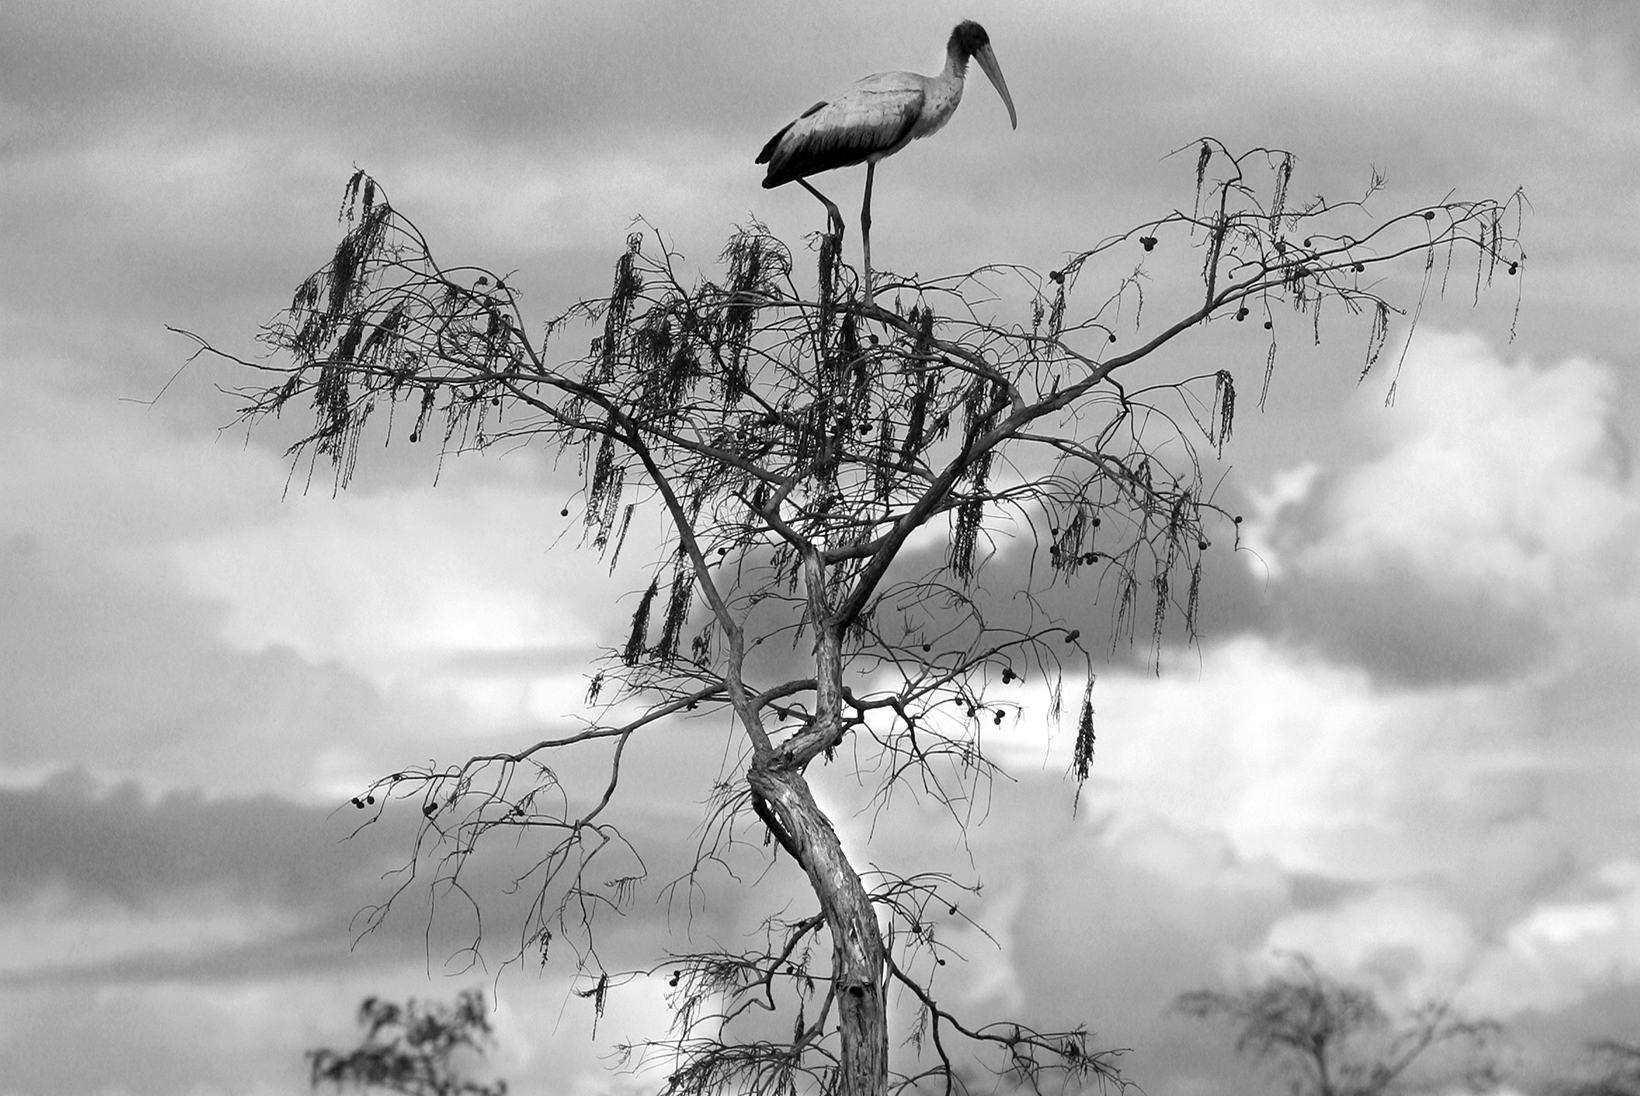 On The Destruction Of A Roseate Spoonbill Marsh Habitat, Early 1960s